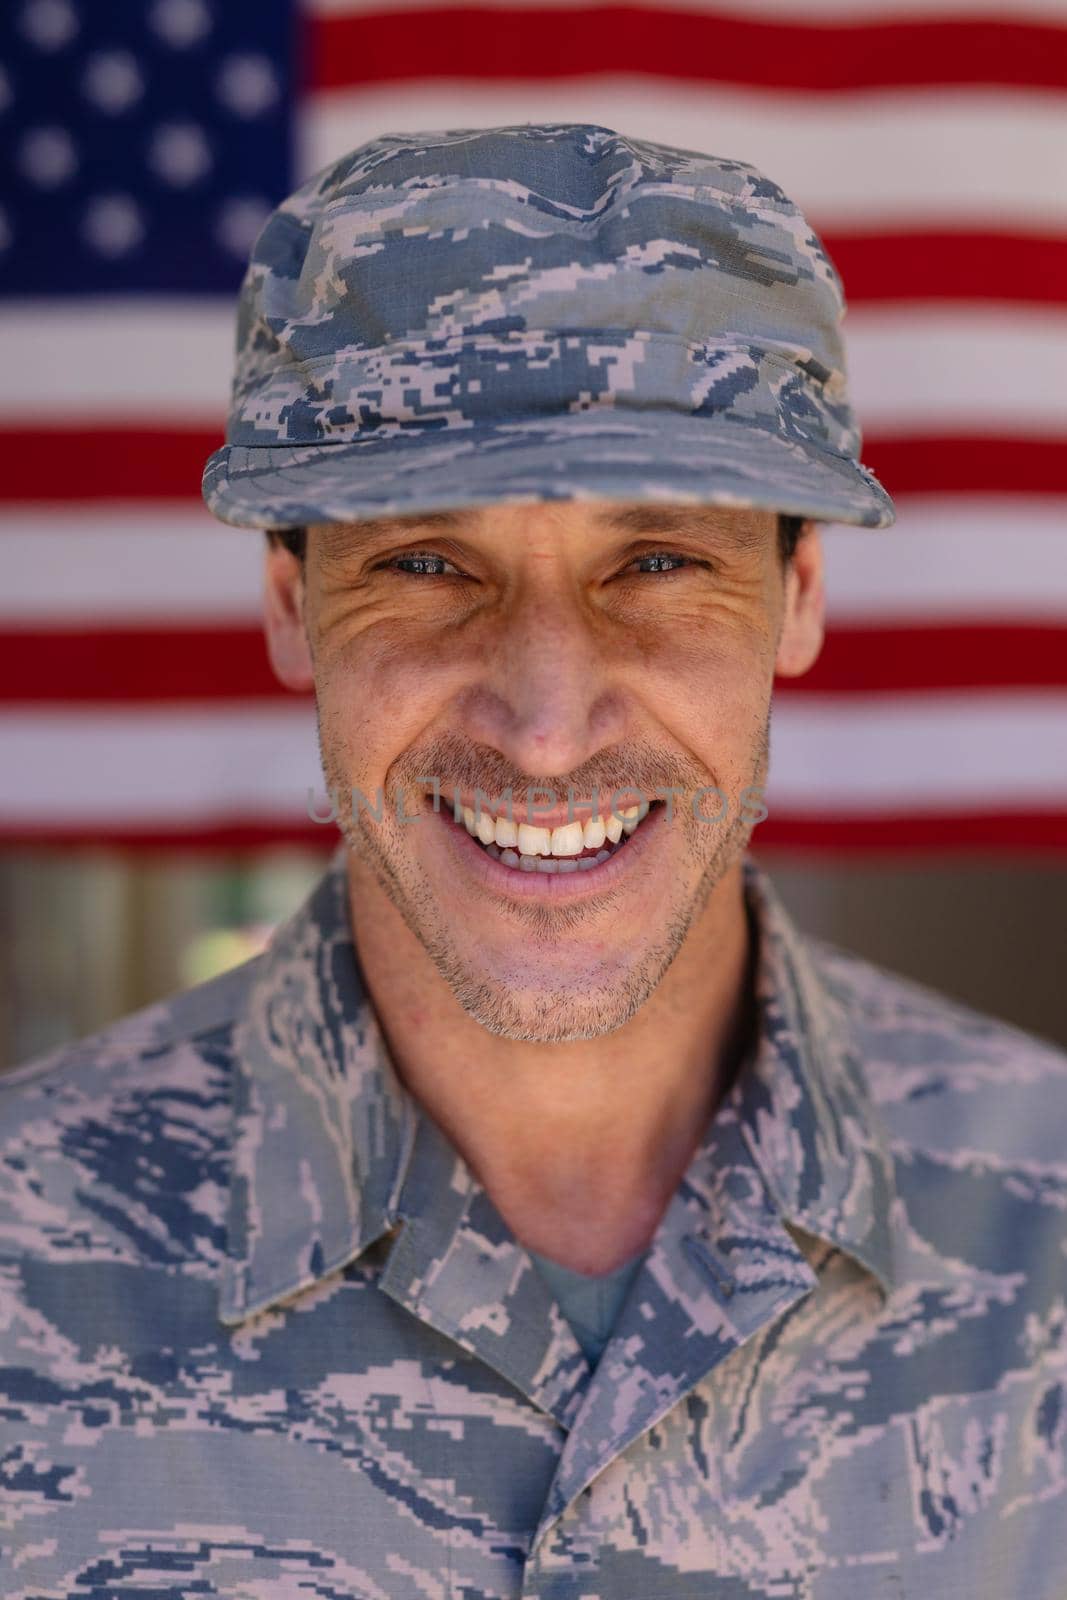 Portrait of smiling caucasian army soldier wearing cap and camouflage uniform against usa flag by Wavebreakmedia